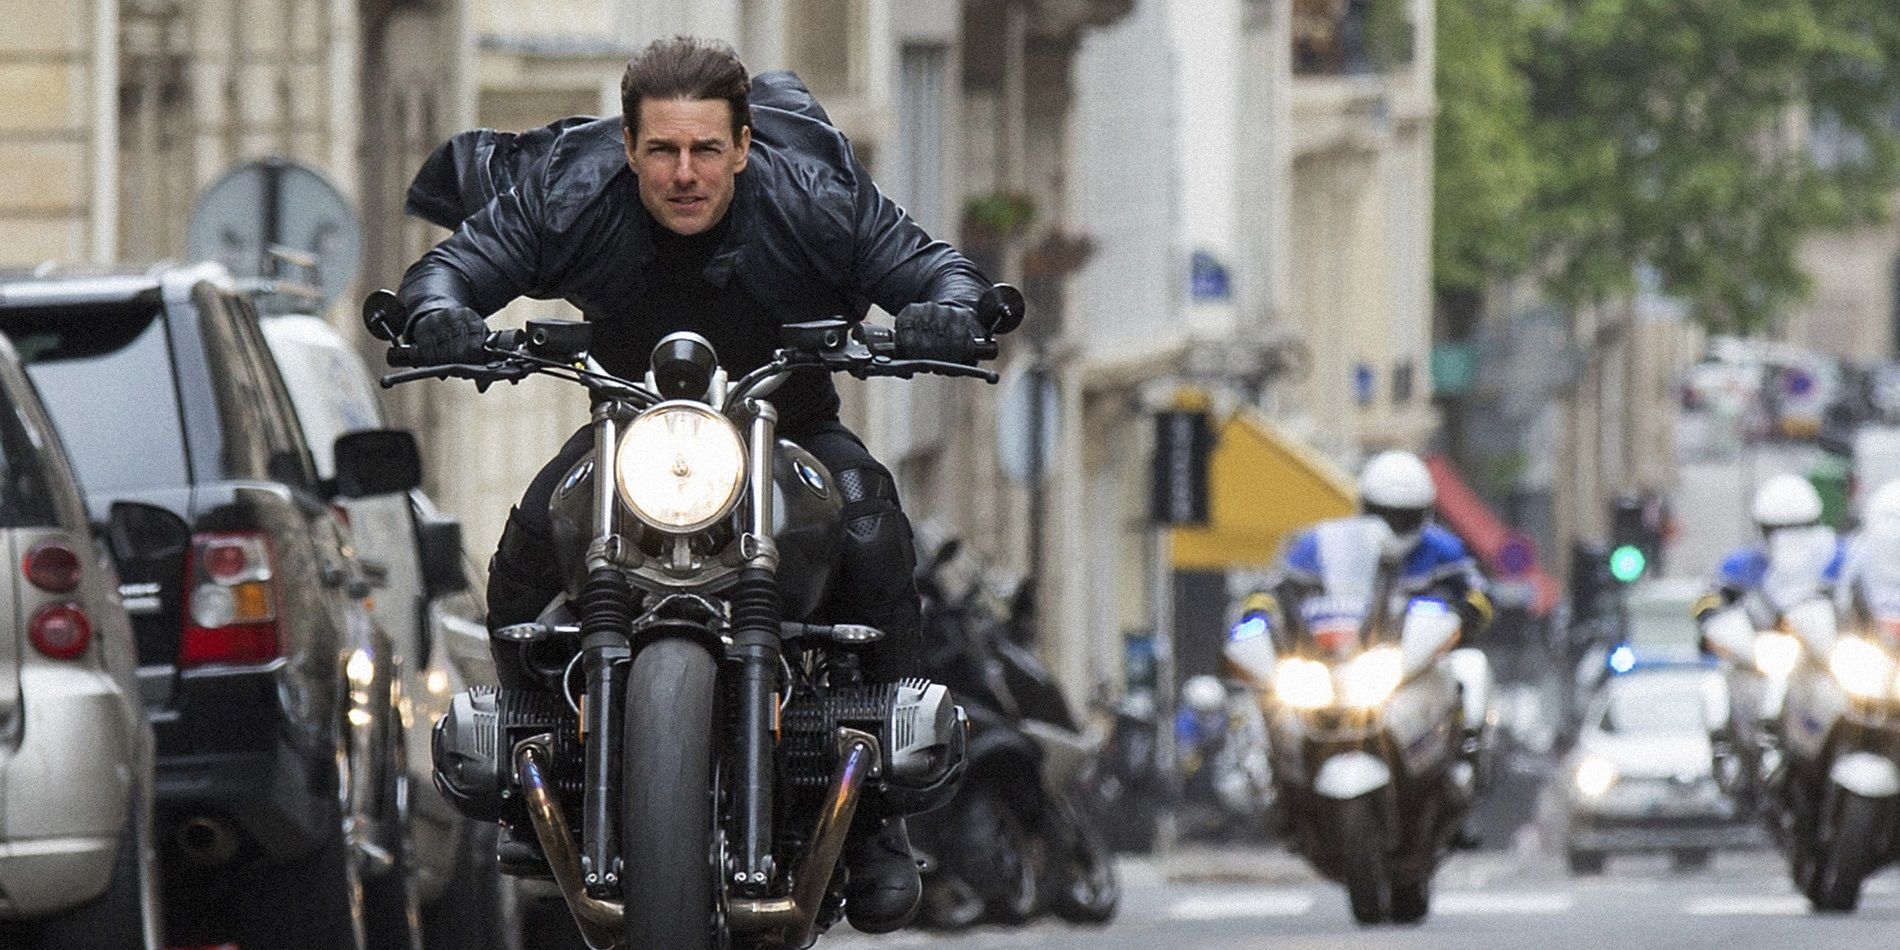 Tom Cruise as Ethan Hunt on a motorcycle in Mission Impossible Fallout